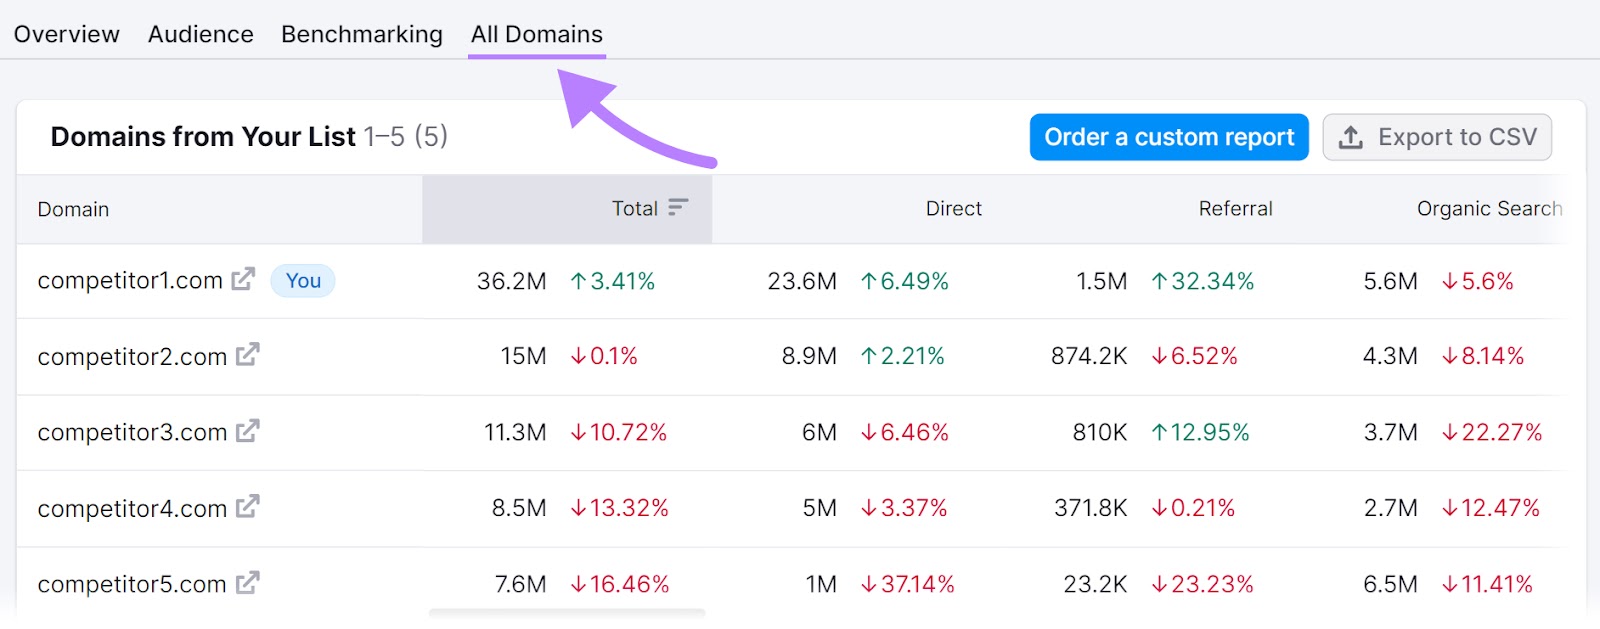 “All Domains” report overview